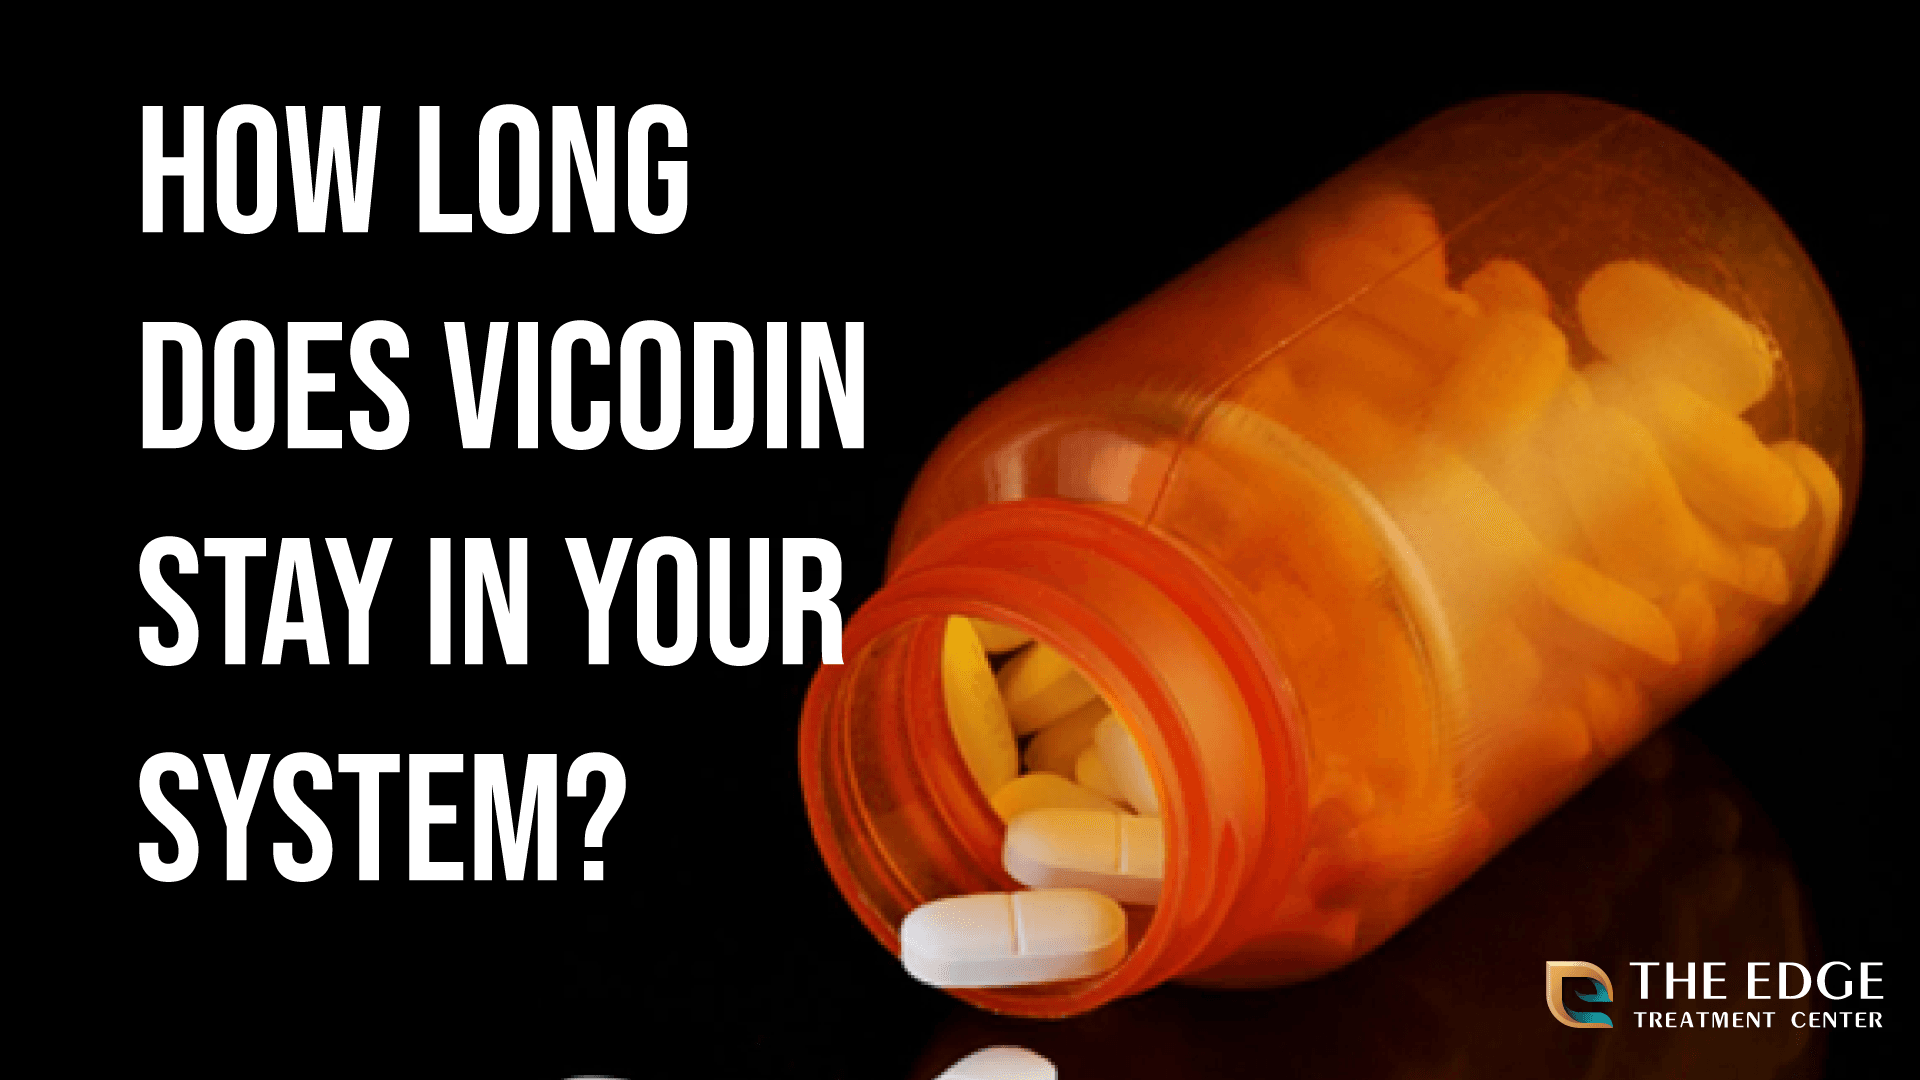 Vicodin Addiction: How Long Does Vicodin Stay in Your System?